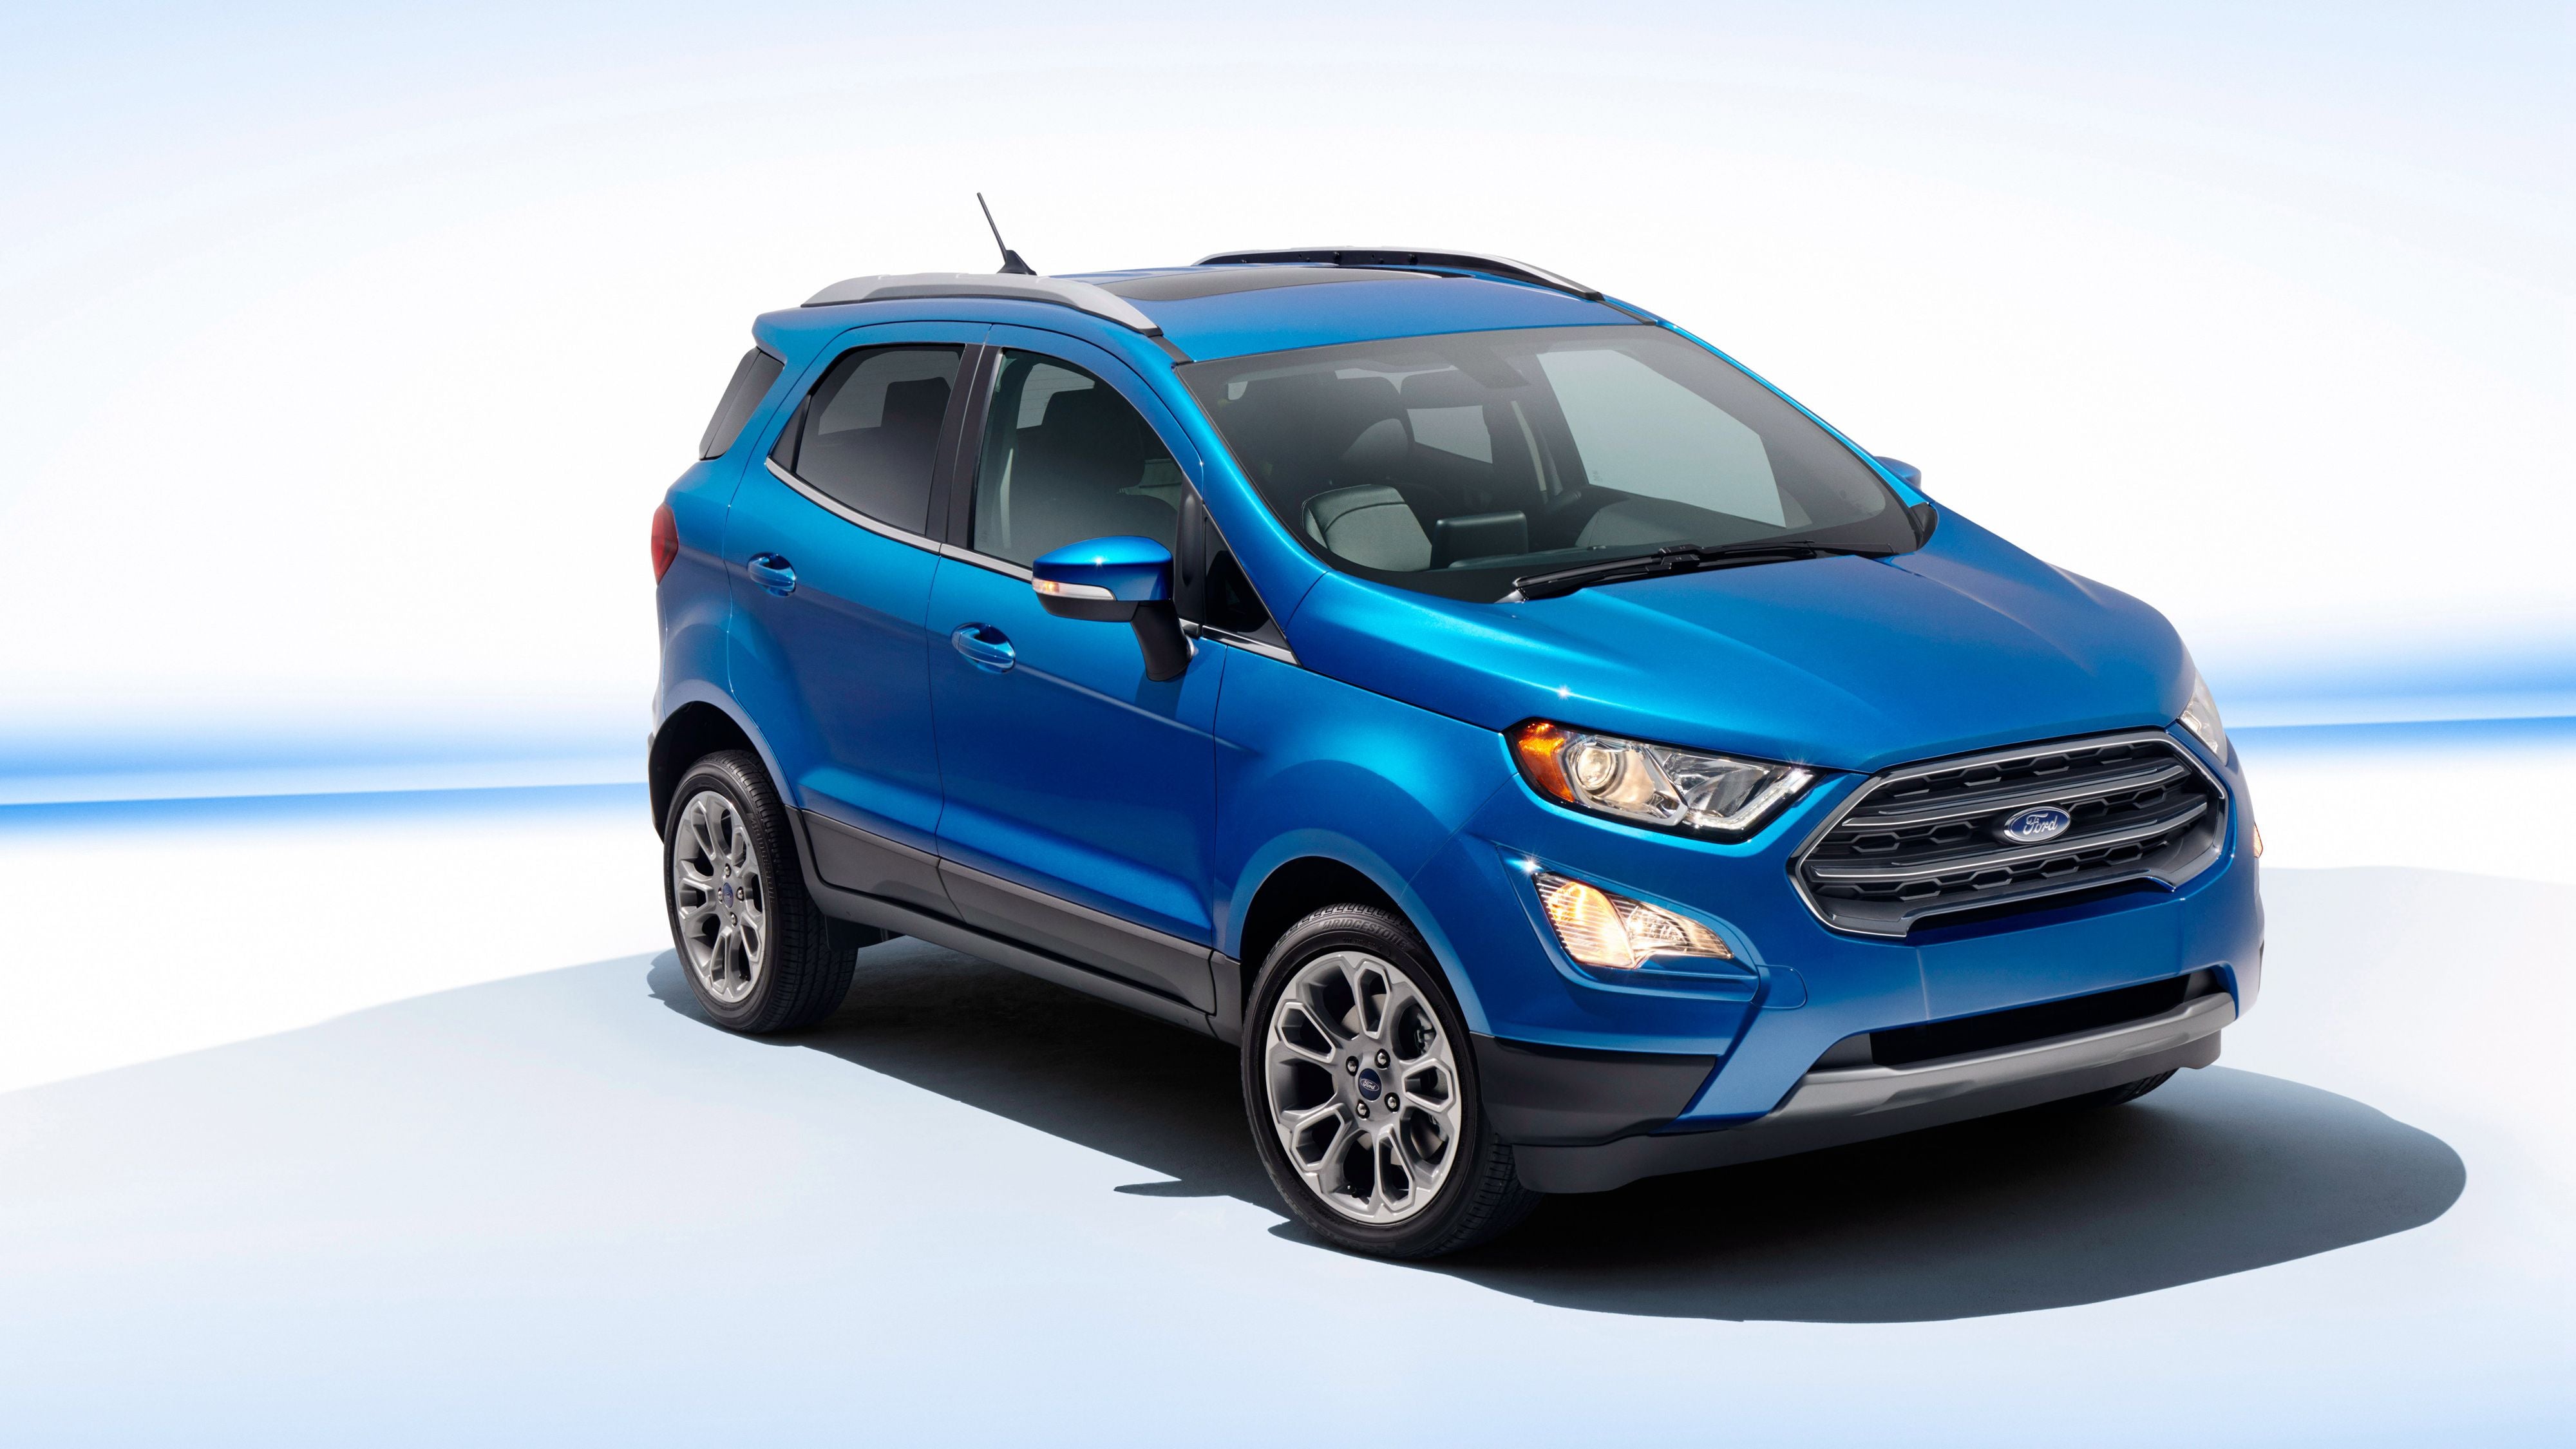 Blue color Ford SUV against a white background